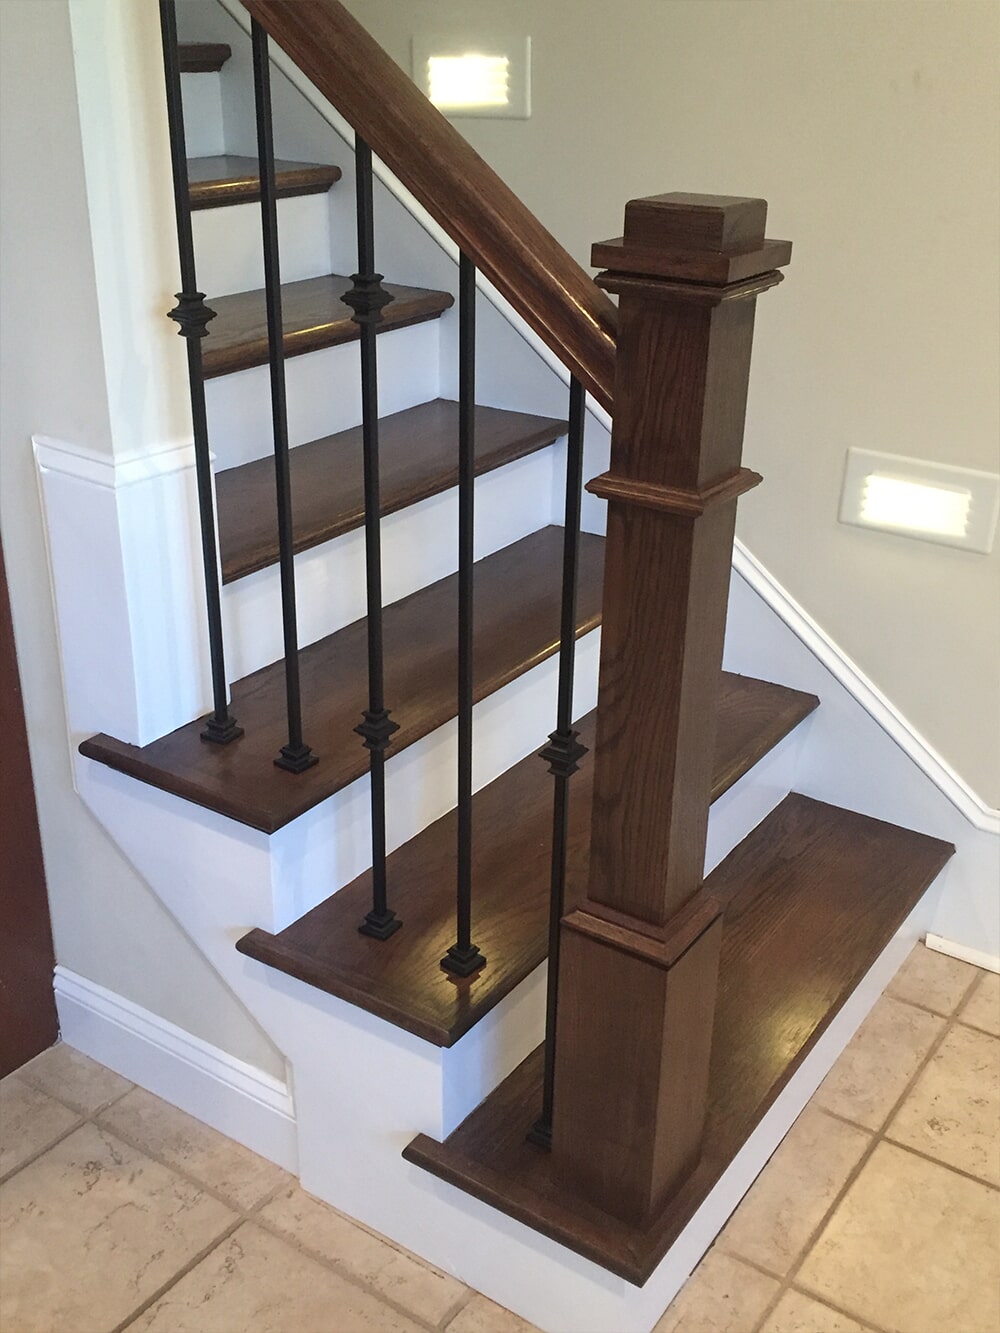 Stair Systems in Hickory, Lenoir, Morganton NC and local and surrounding areas from Munday Hardwoods, Inc